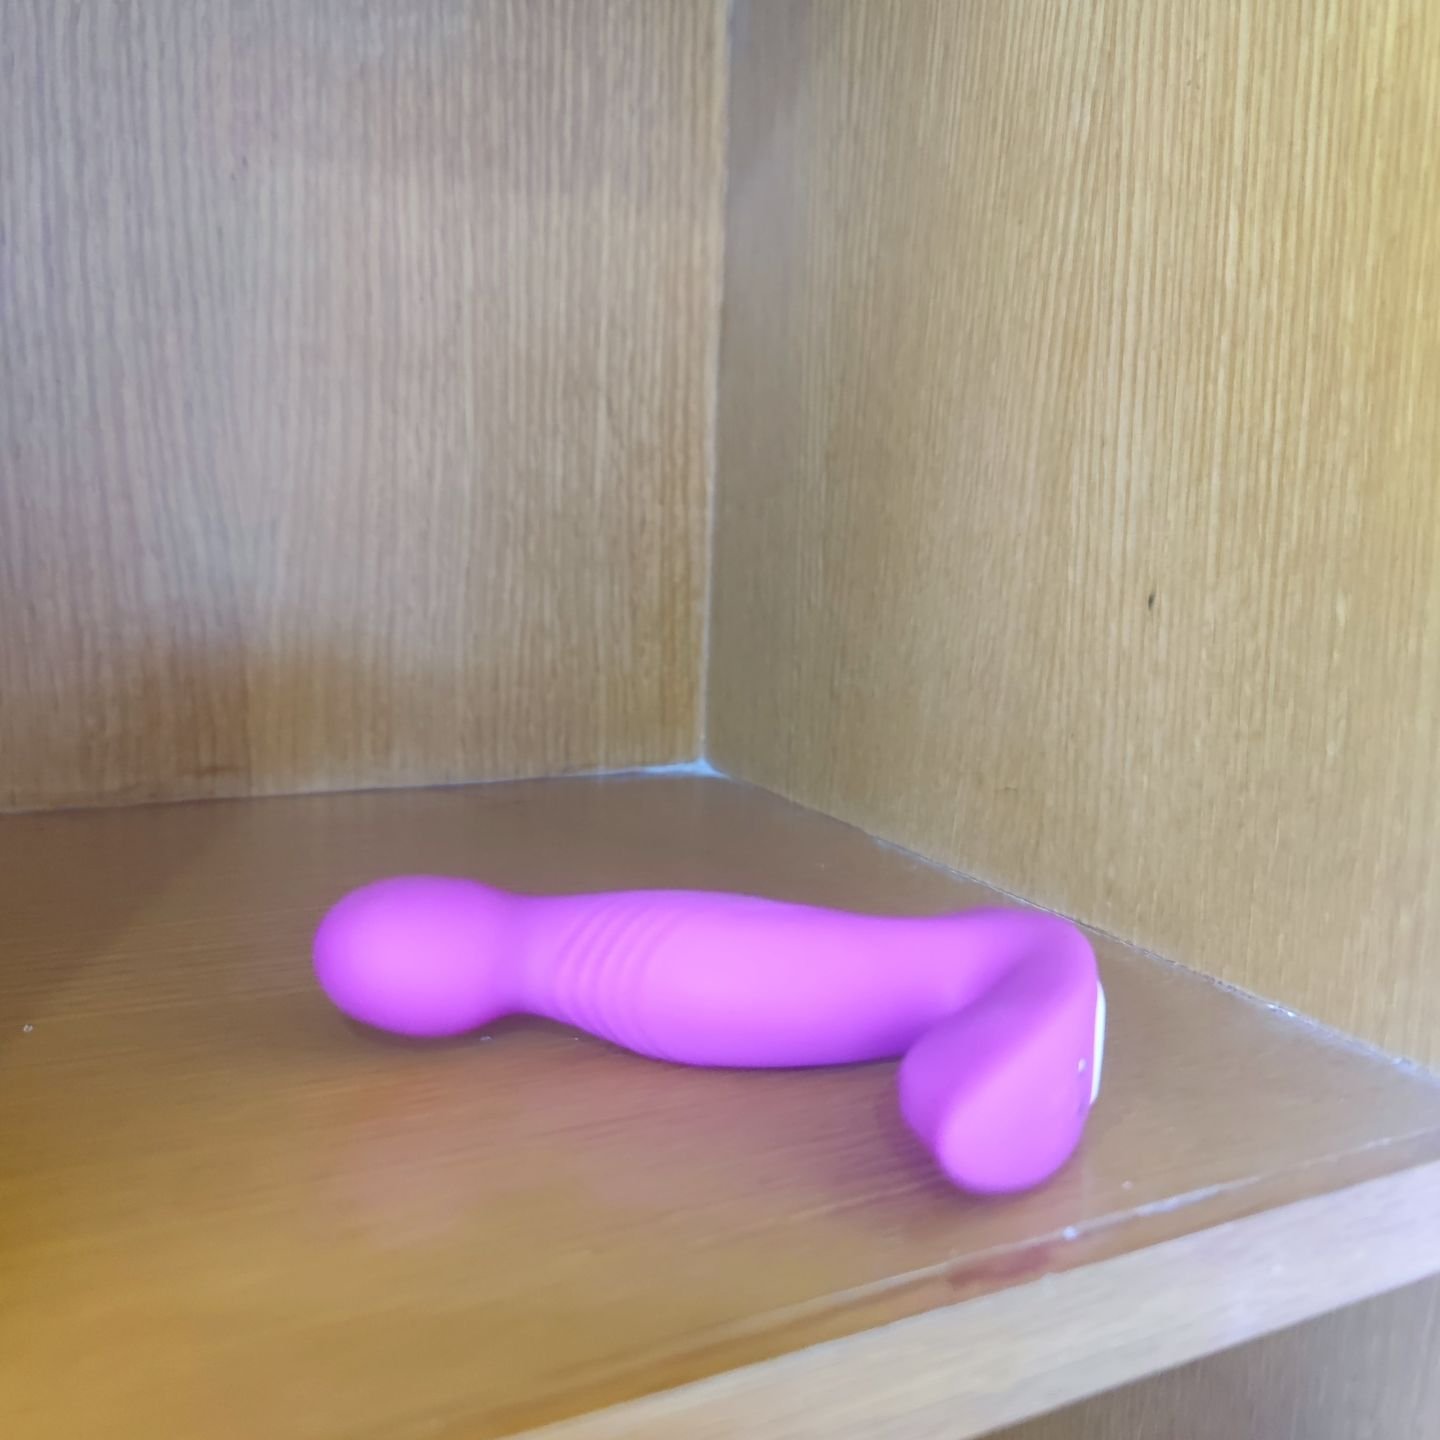 Crave - G-Spot Vibrator With Rotating Head photo review